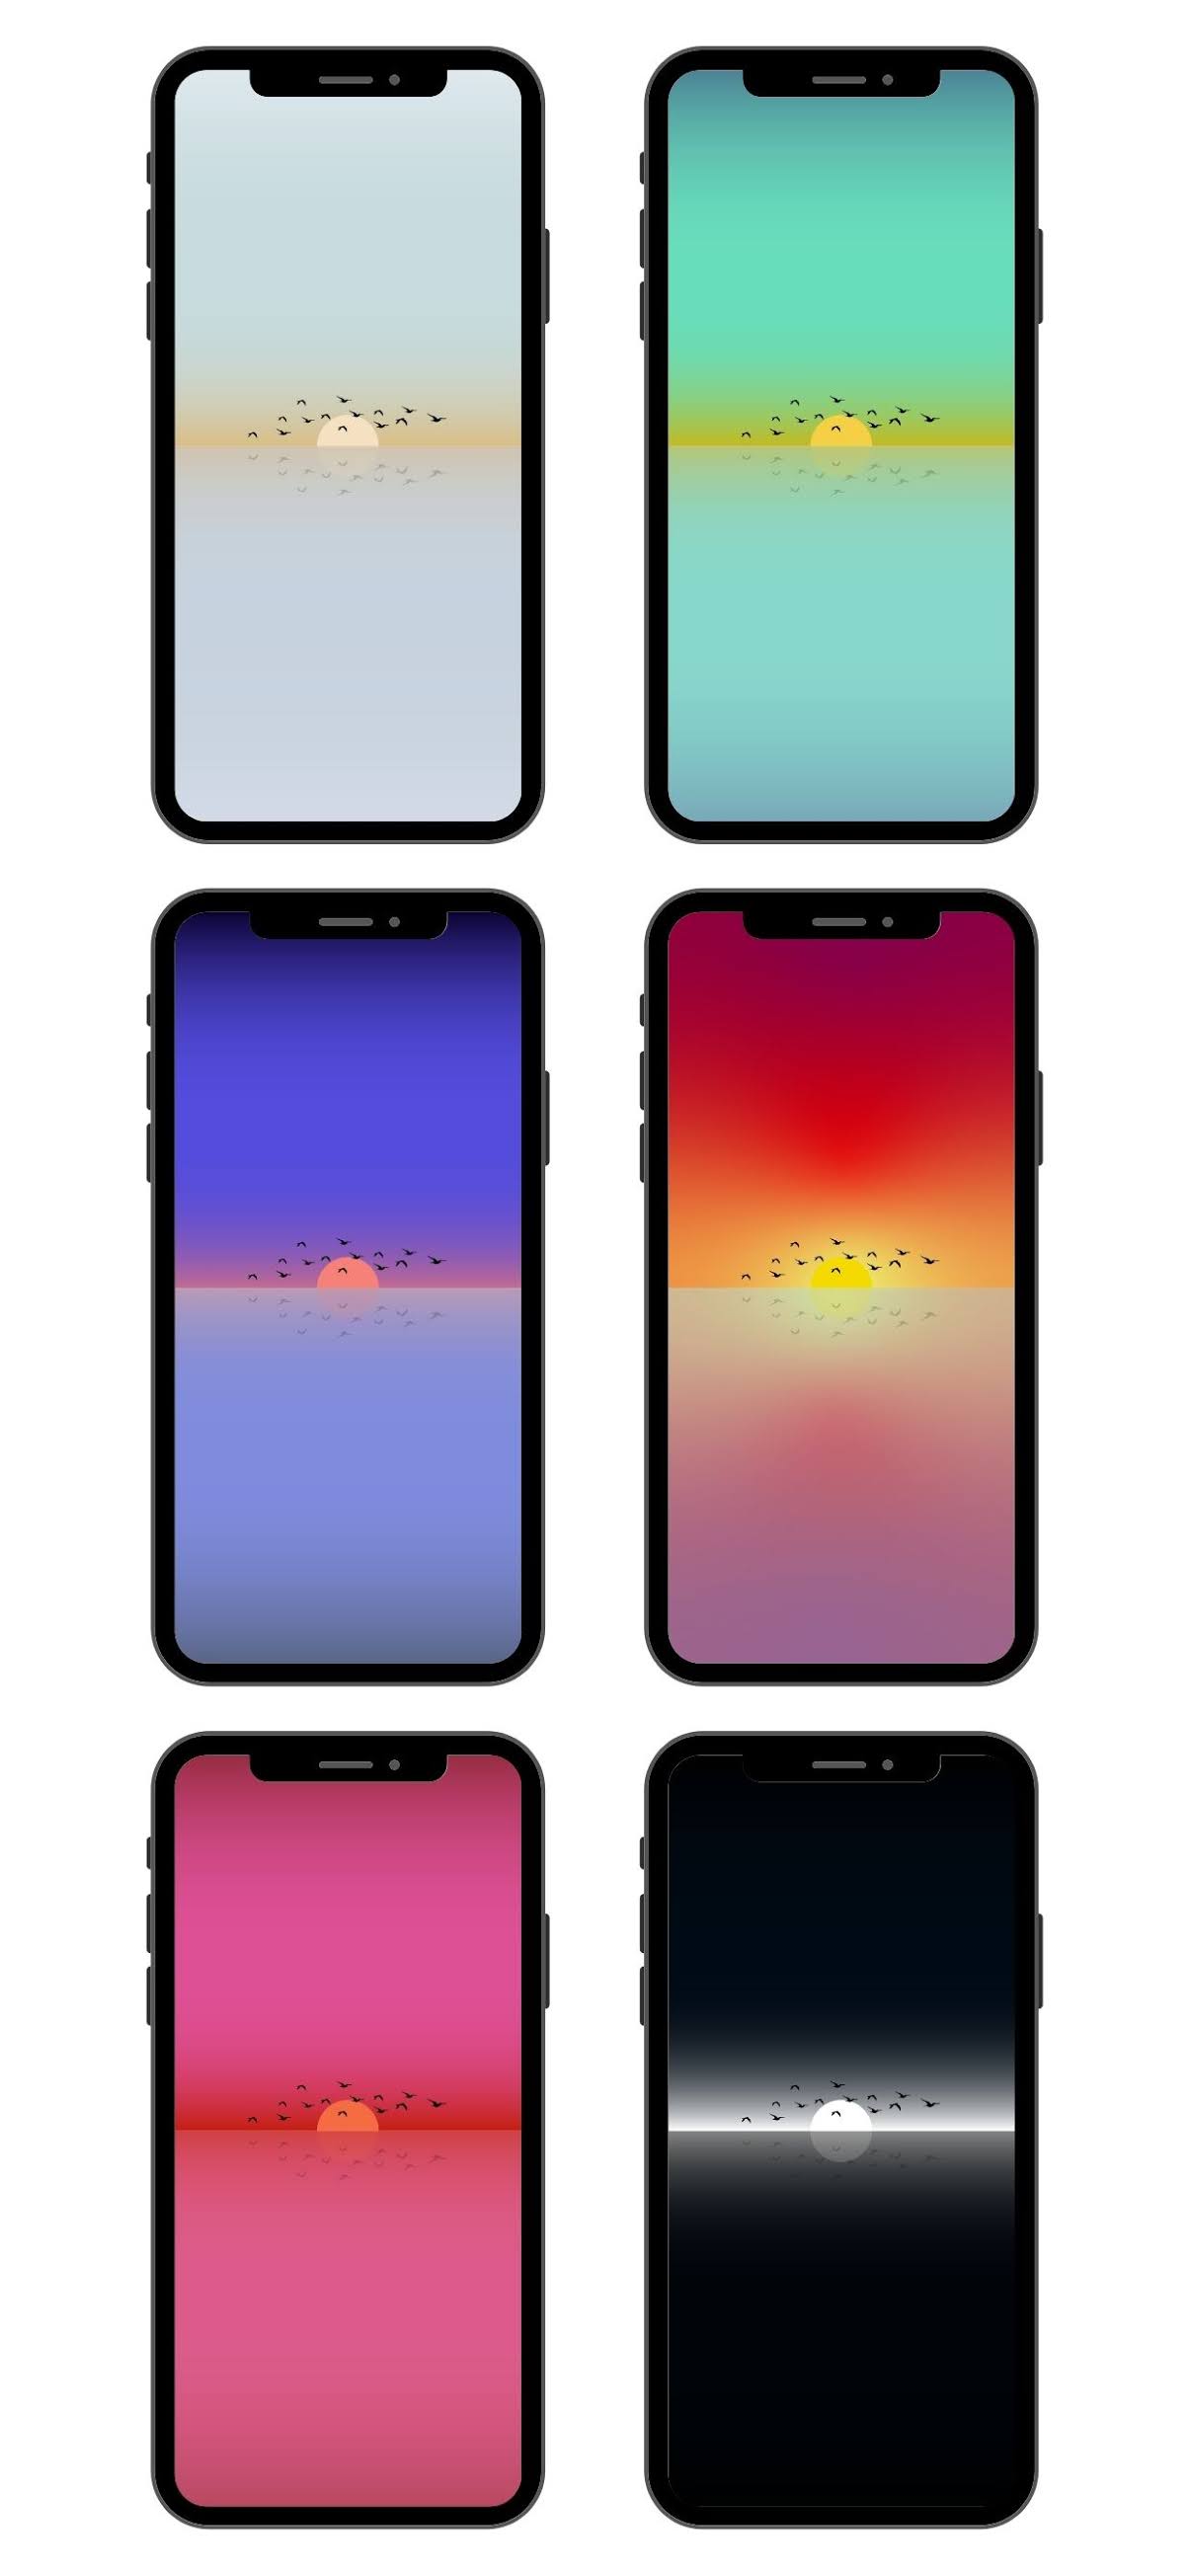 Minimalist phone wallpapers - Sunset and birds flying